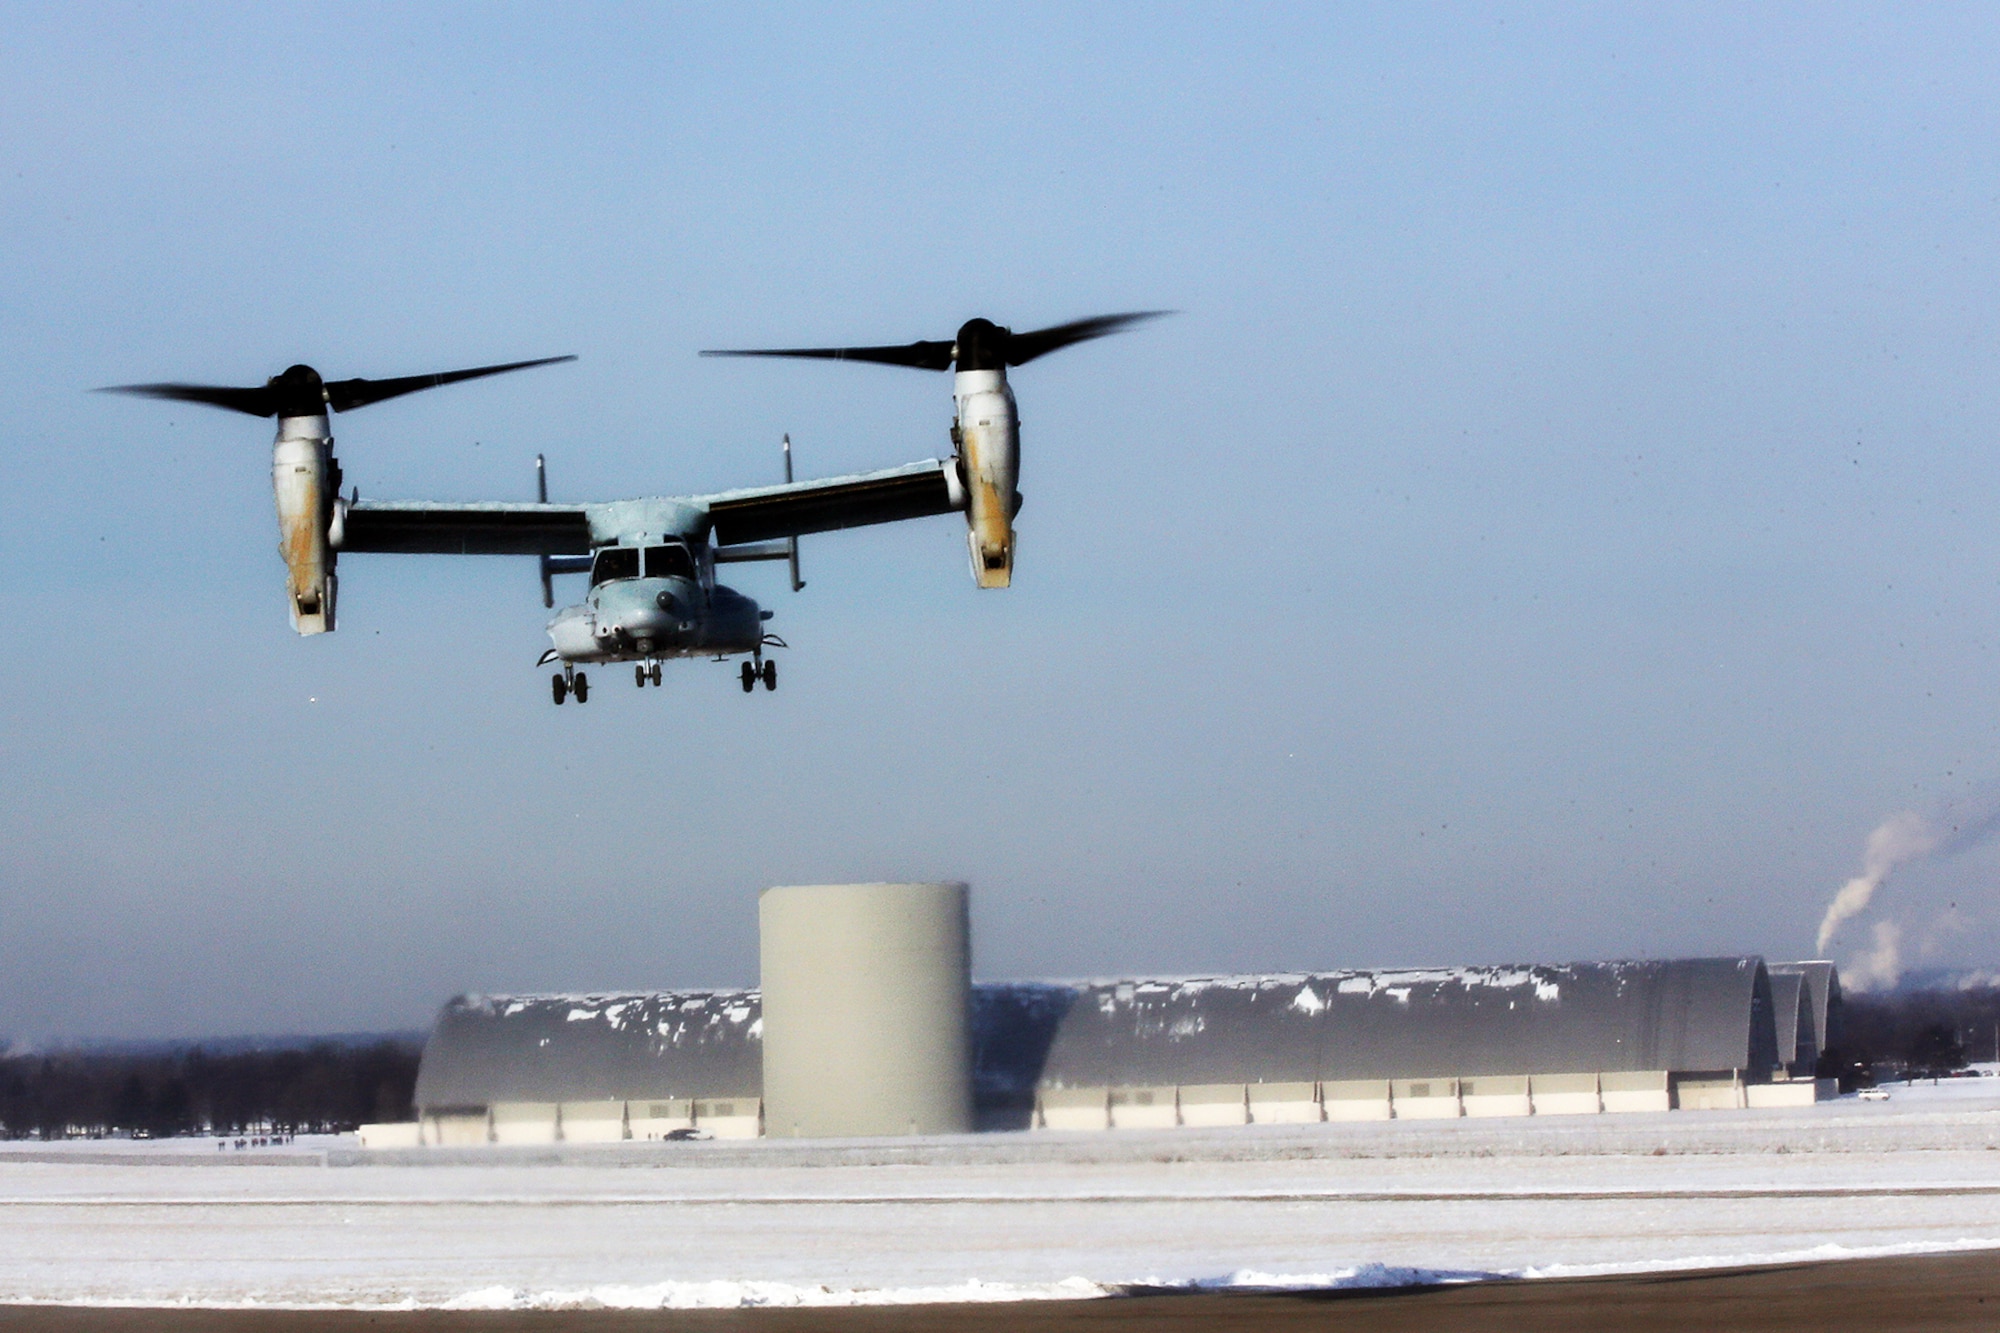 DAYTON, Ohio -- The Bell-Boeing CV-22B Osprey landed at the National Museum of the U.S. Air Force on Dec. 12, 2013. (U.S. Air Force photo by Don Popp)